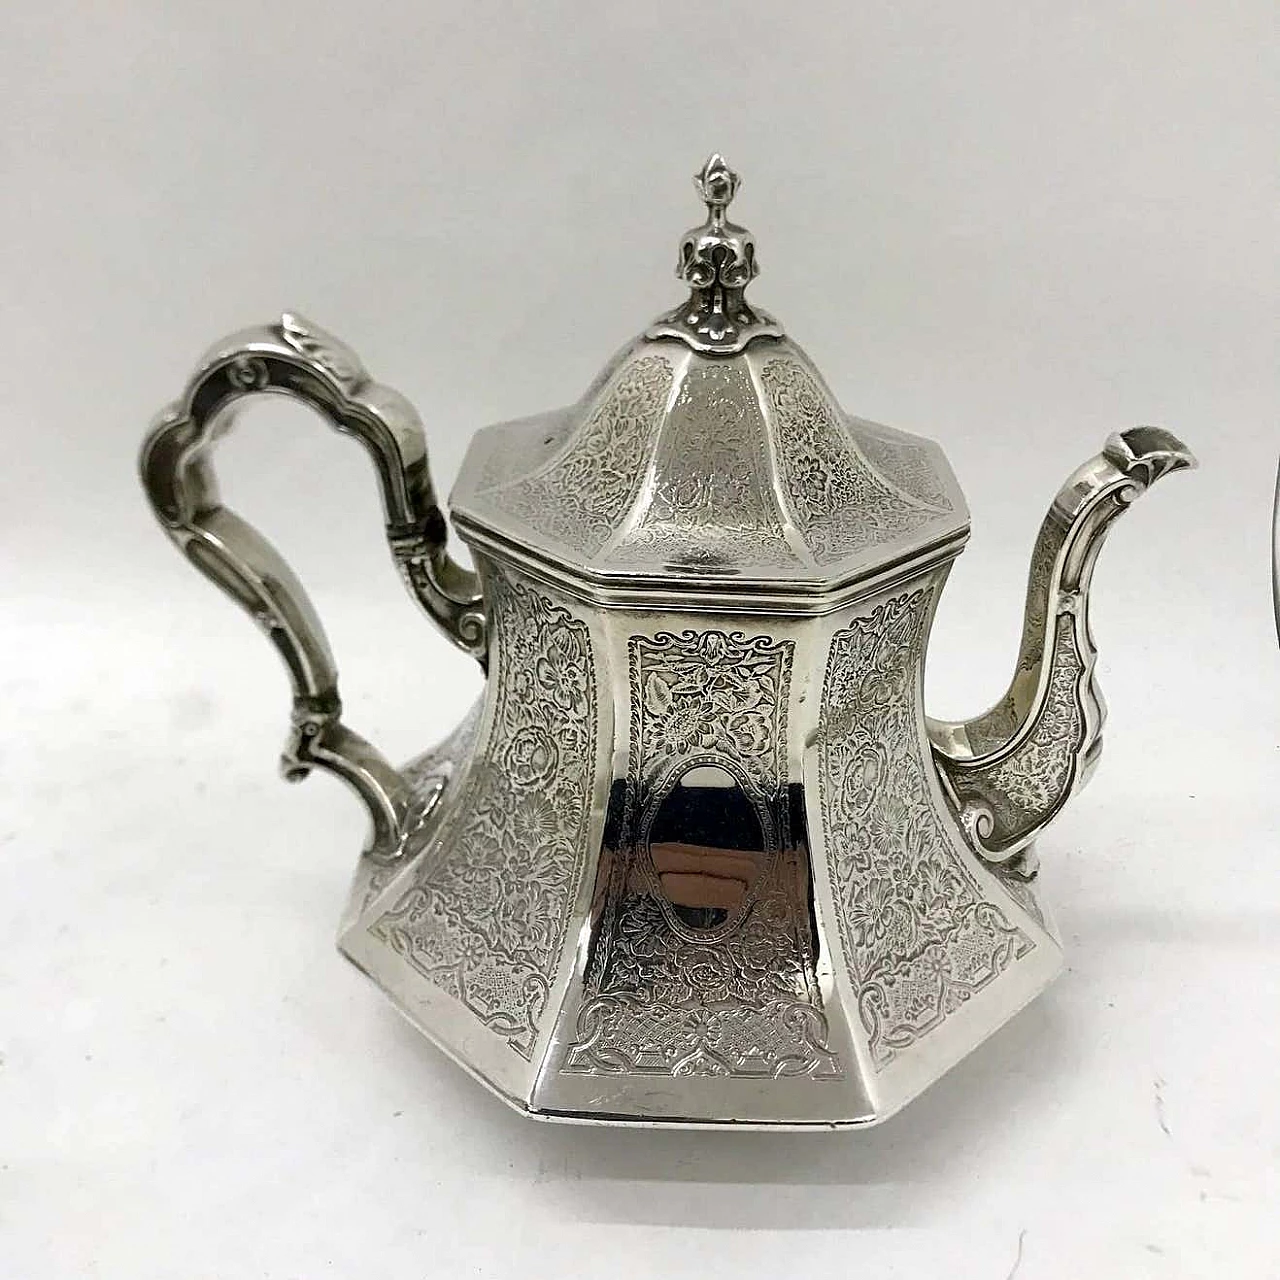 Art Nouveau tea service in engraved silver plated by Skinner & Co, 19th century 1344359